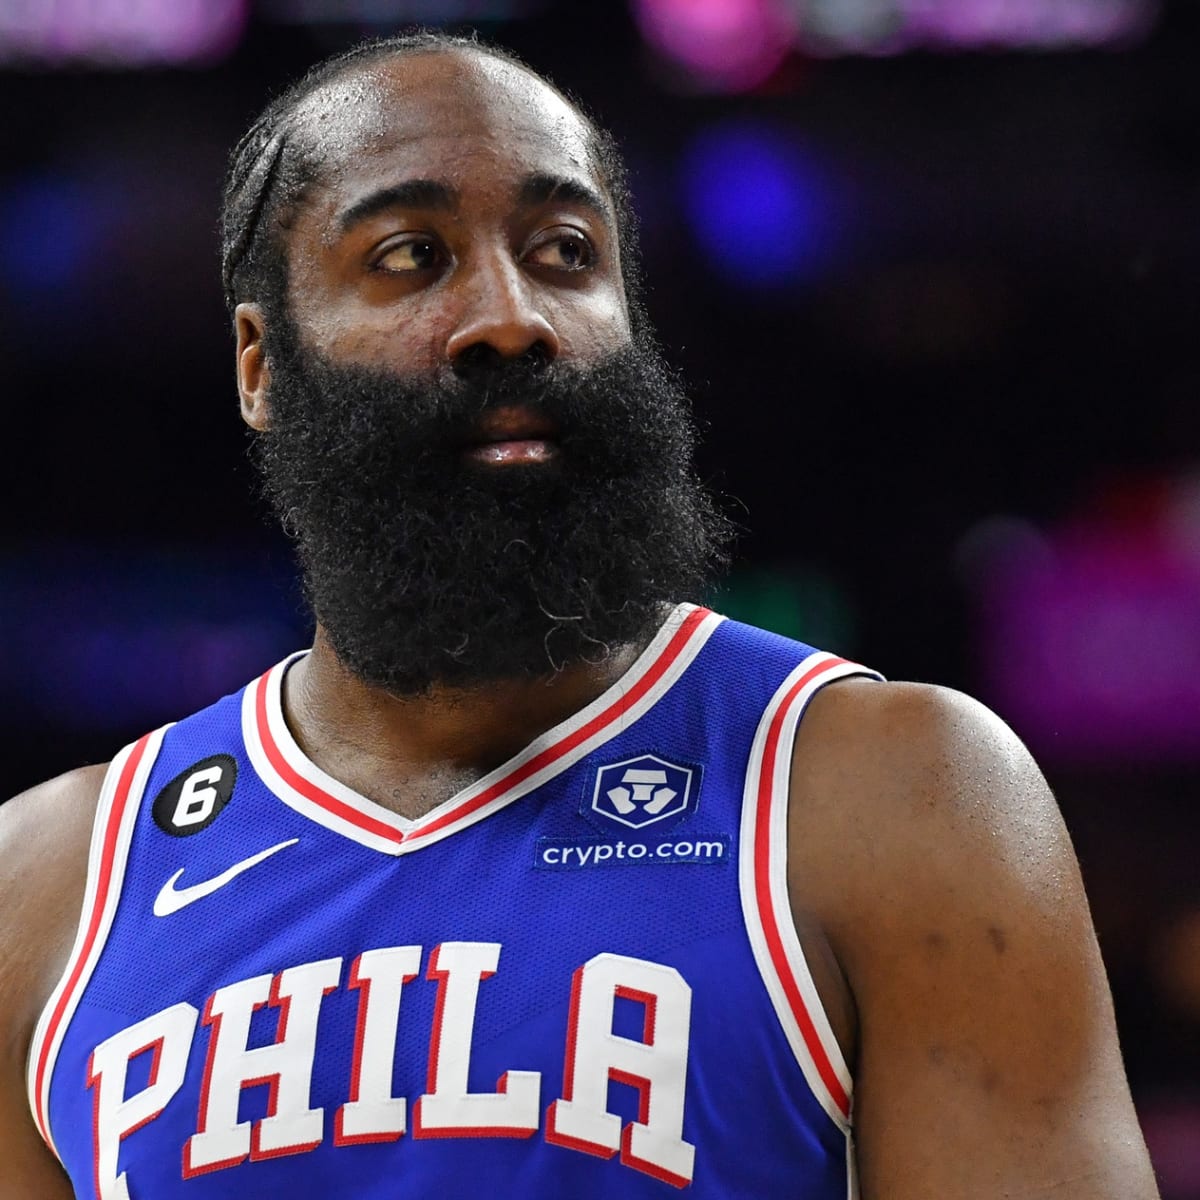 Sixers: Did James Harden trade secure an extended playoff run?